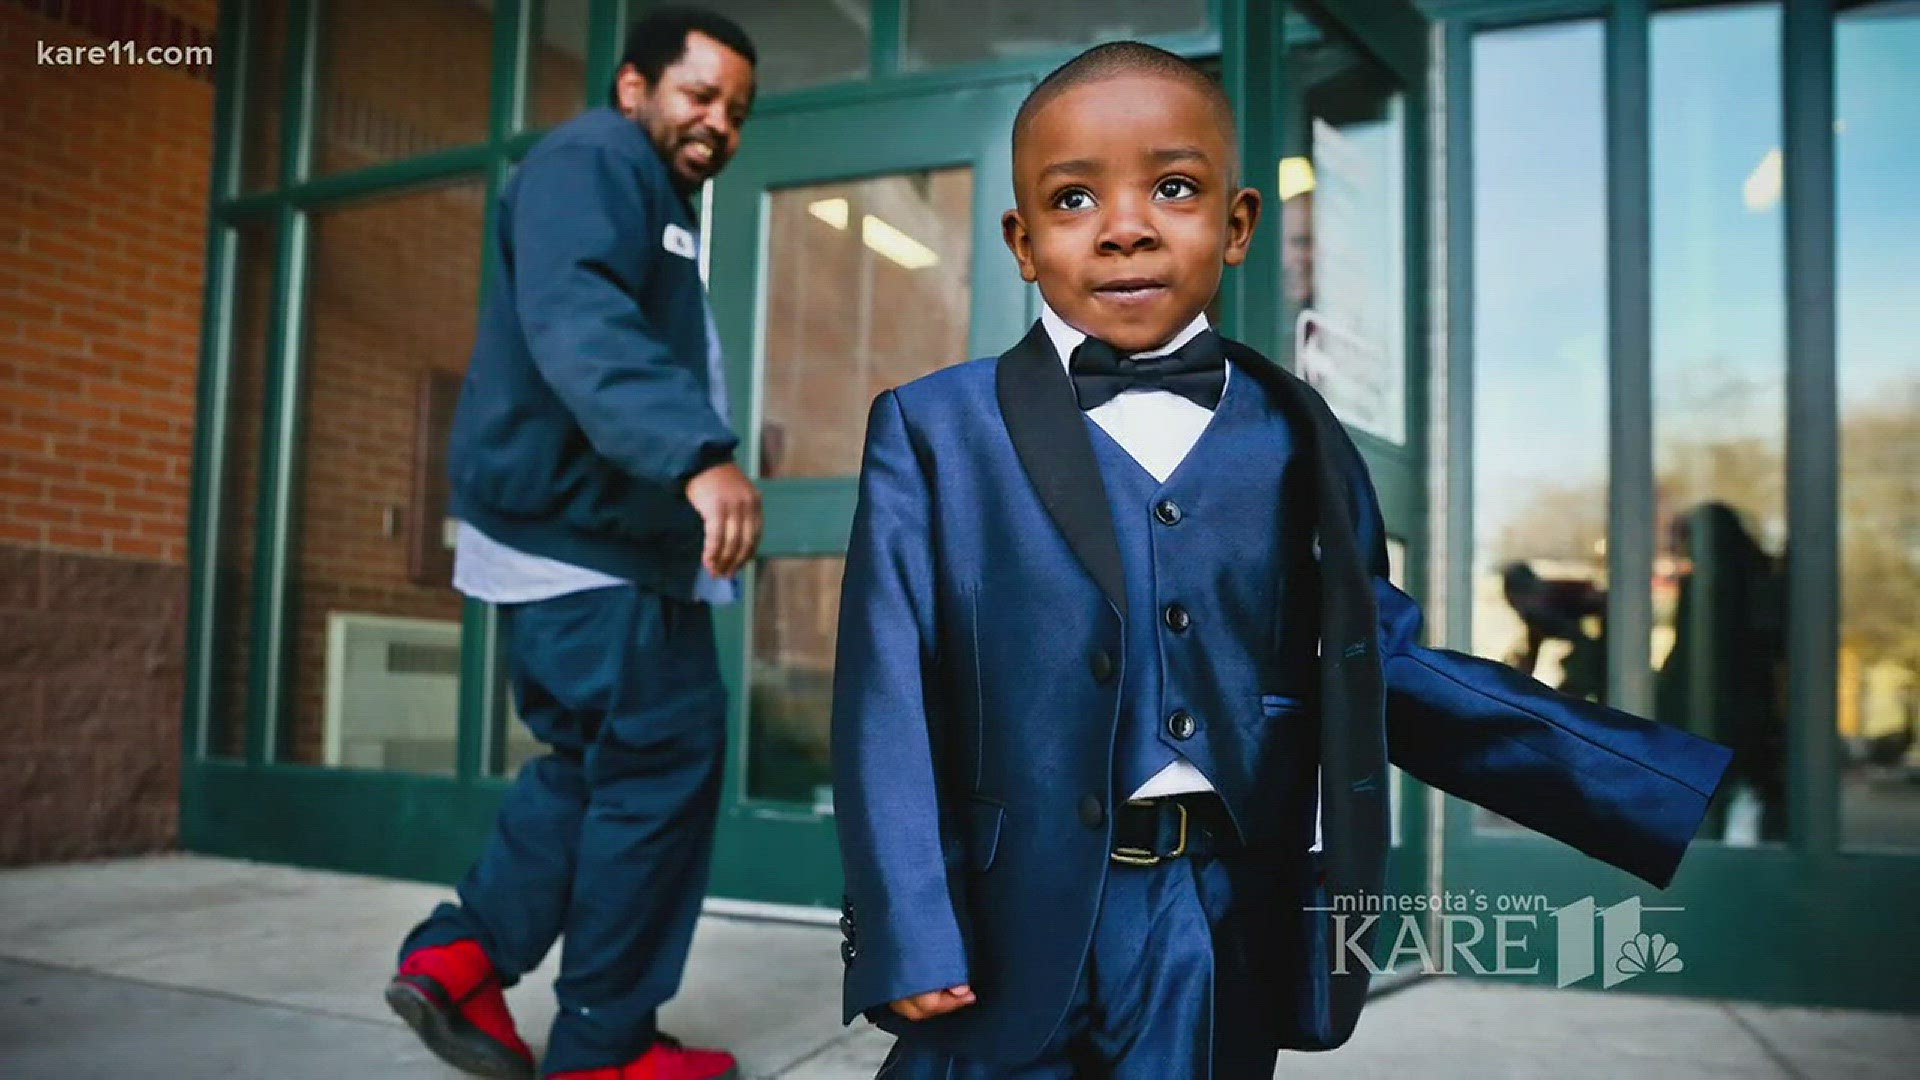 Lucy Laney Elementary recently held their first ever "Bring Your Adult to Prom" and it was adorable in every possible way. KARE 11 photojournalist Ben Garvin was there to capture the cuteness. http://kare11.tv/2CO71eI